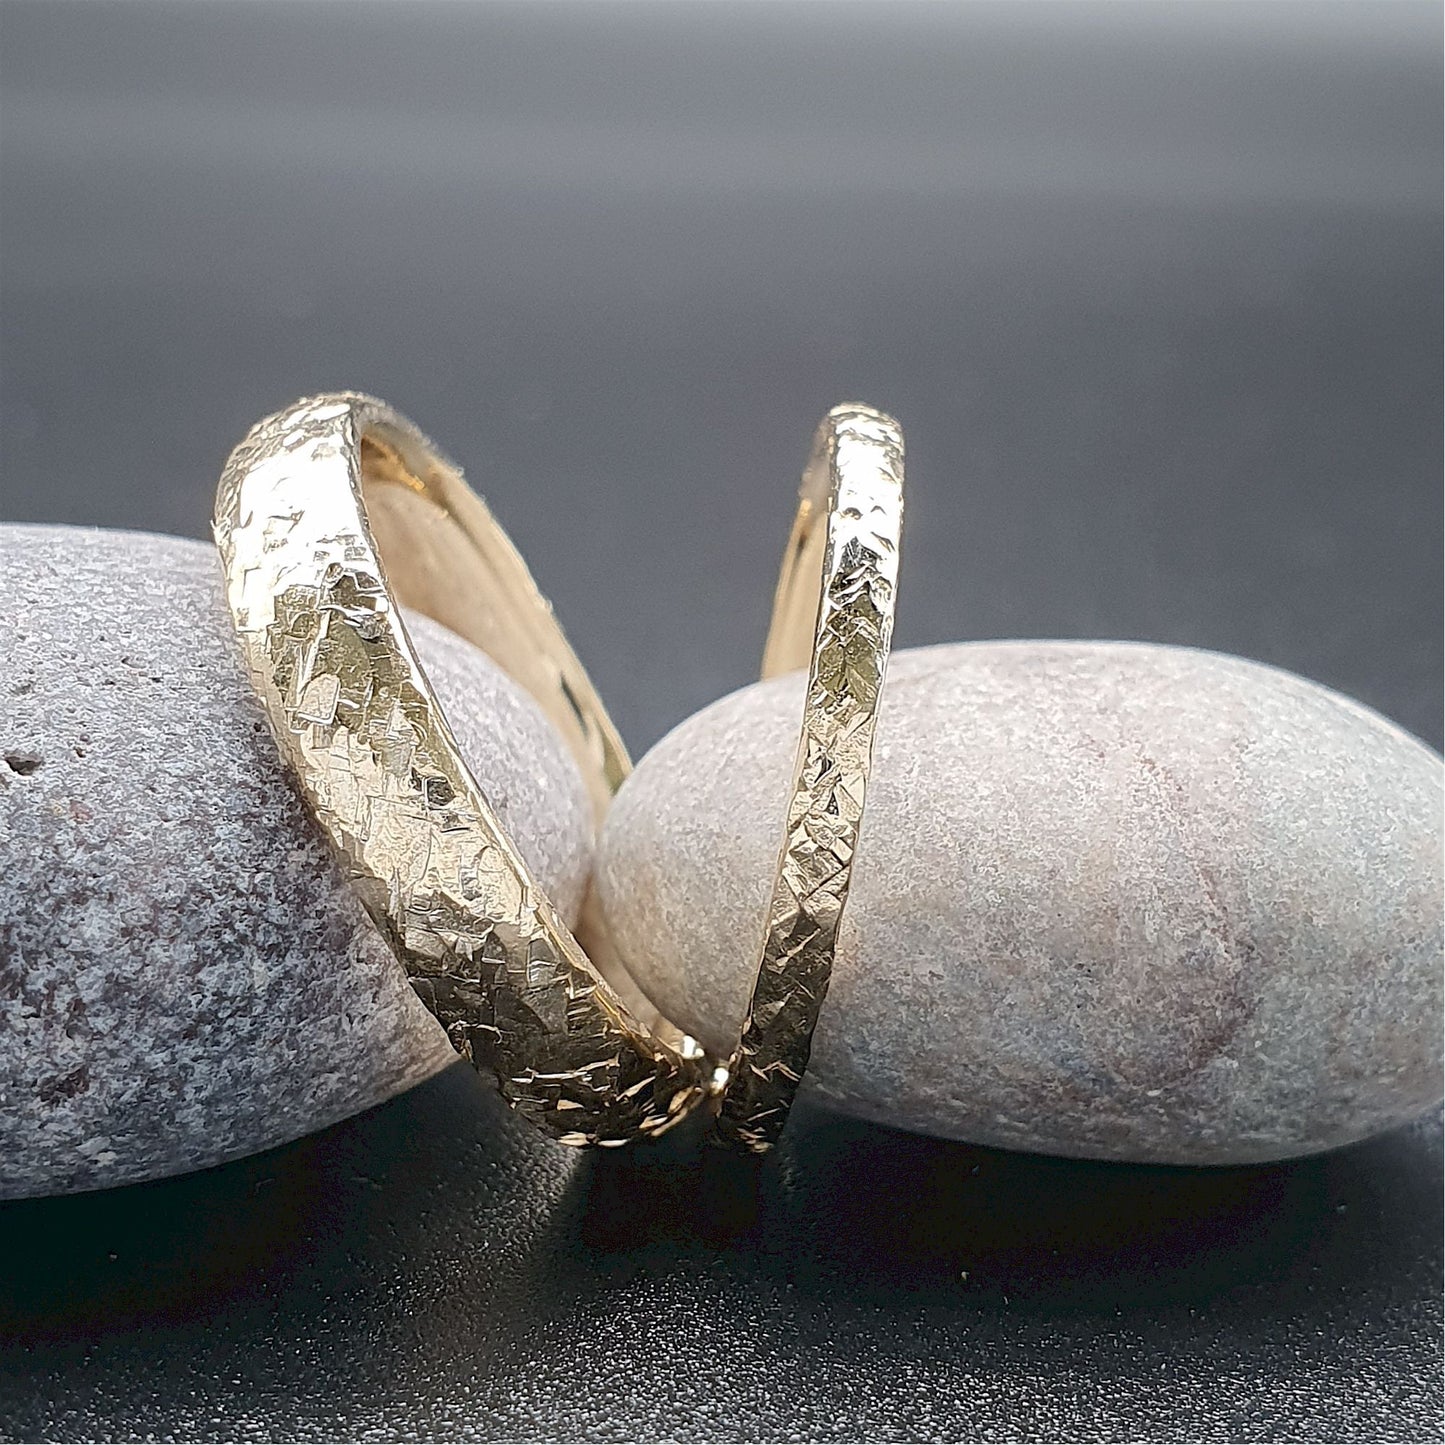 Wedding ring, thin yellow gold Fire hammered design - Cumbrian Designs